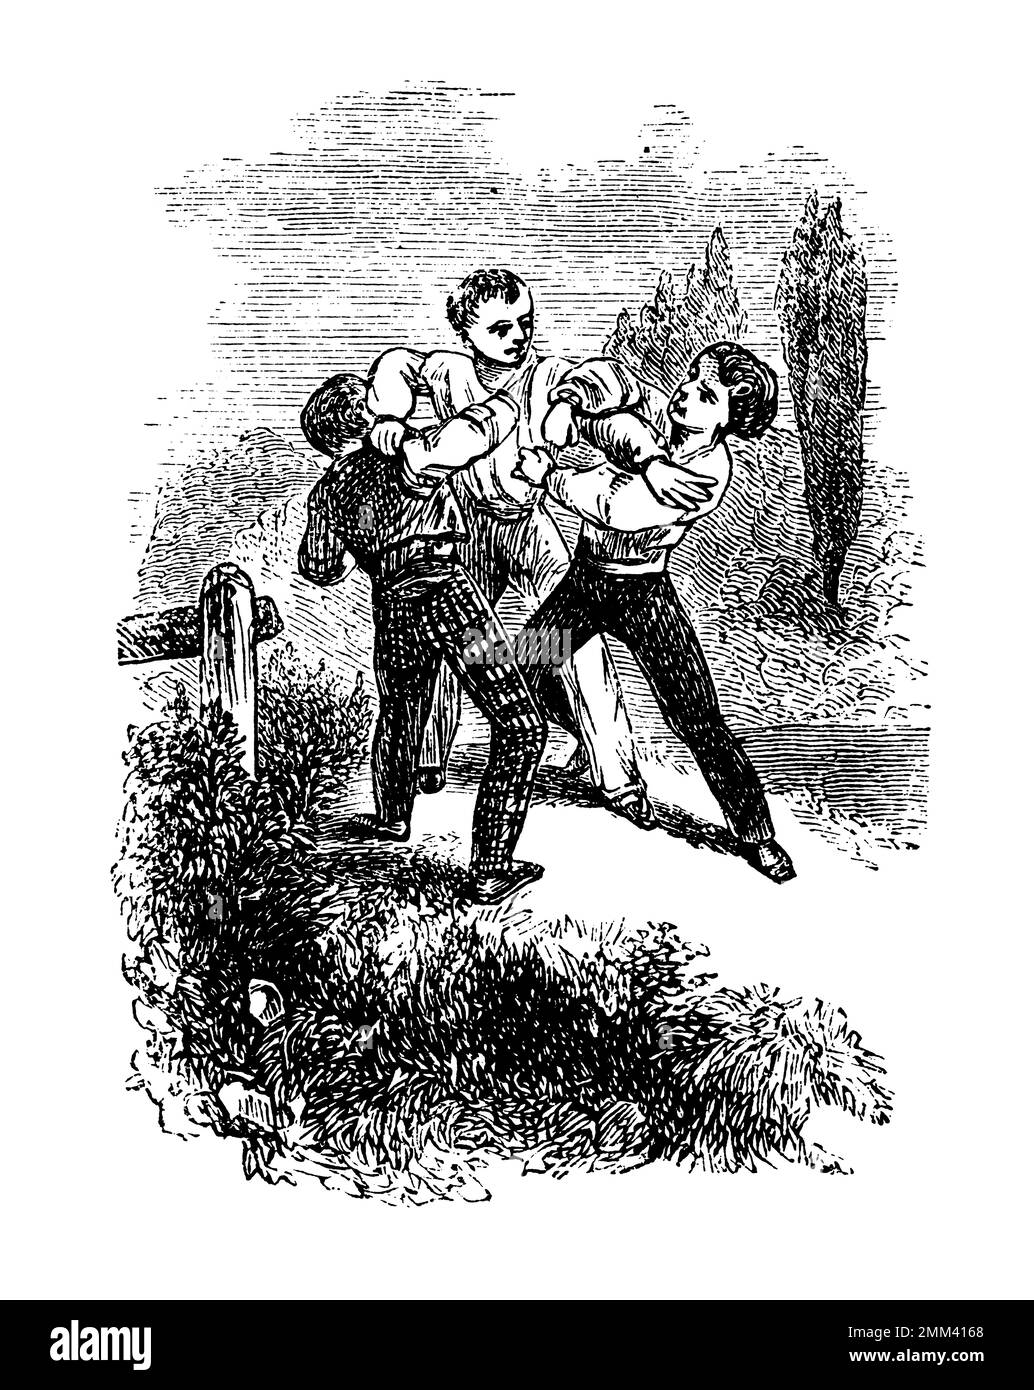 Antique illustration of king of the castle, an outdoor children's game, also known as king of the hill or king of the mountain. Published in American’ Stock Photo